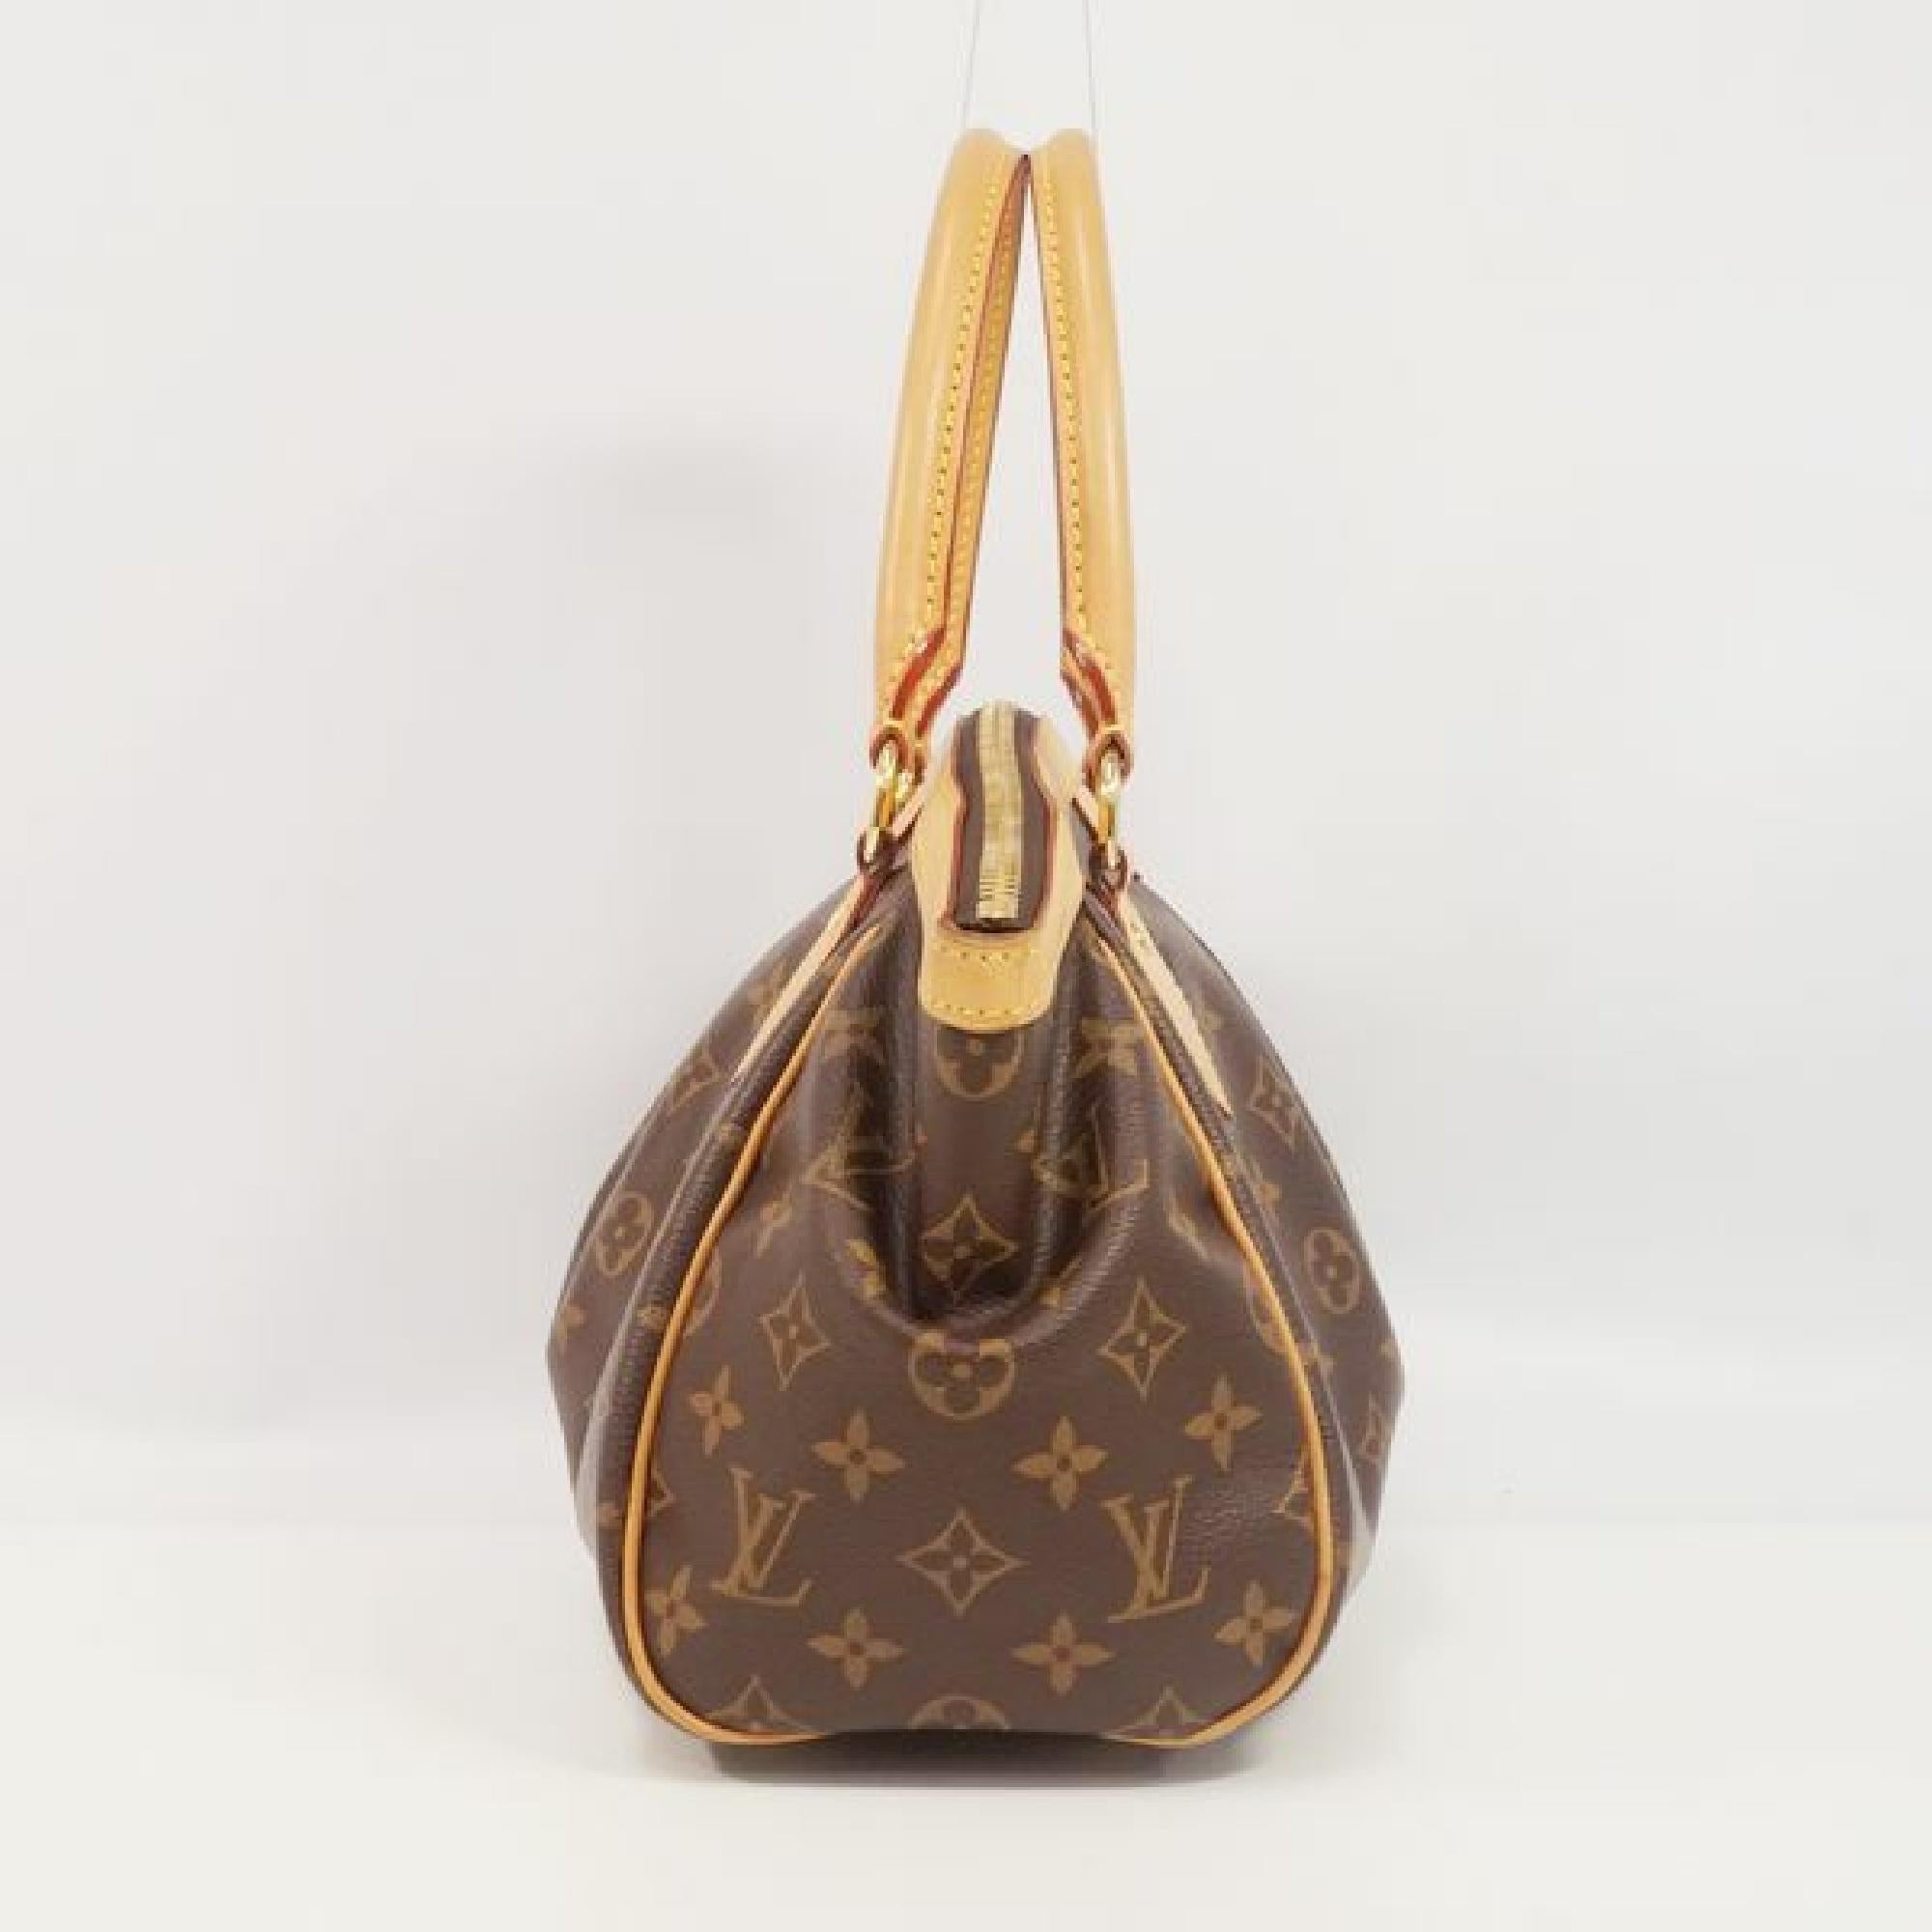 An authentic LOUIS VUITTON Tivoli PM Womens handbag M40143 The outside material is Monogram canvas. The pattern is TivoliPM. This item is Contemporary. The year of manufacture would be 2014.
Rank
AB signs of wear (Small)
Used goods in good condition